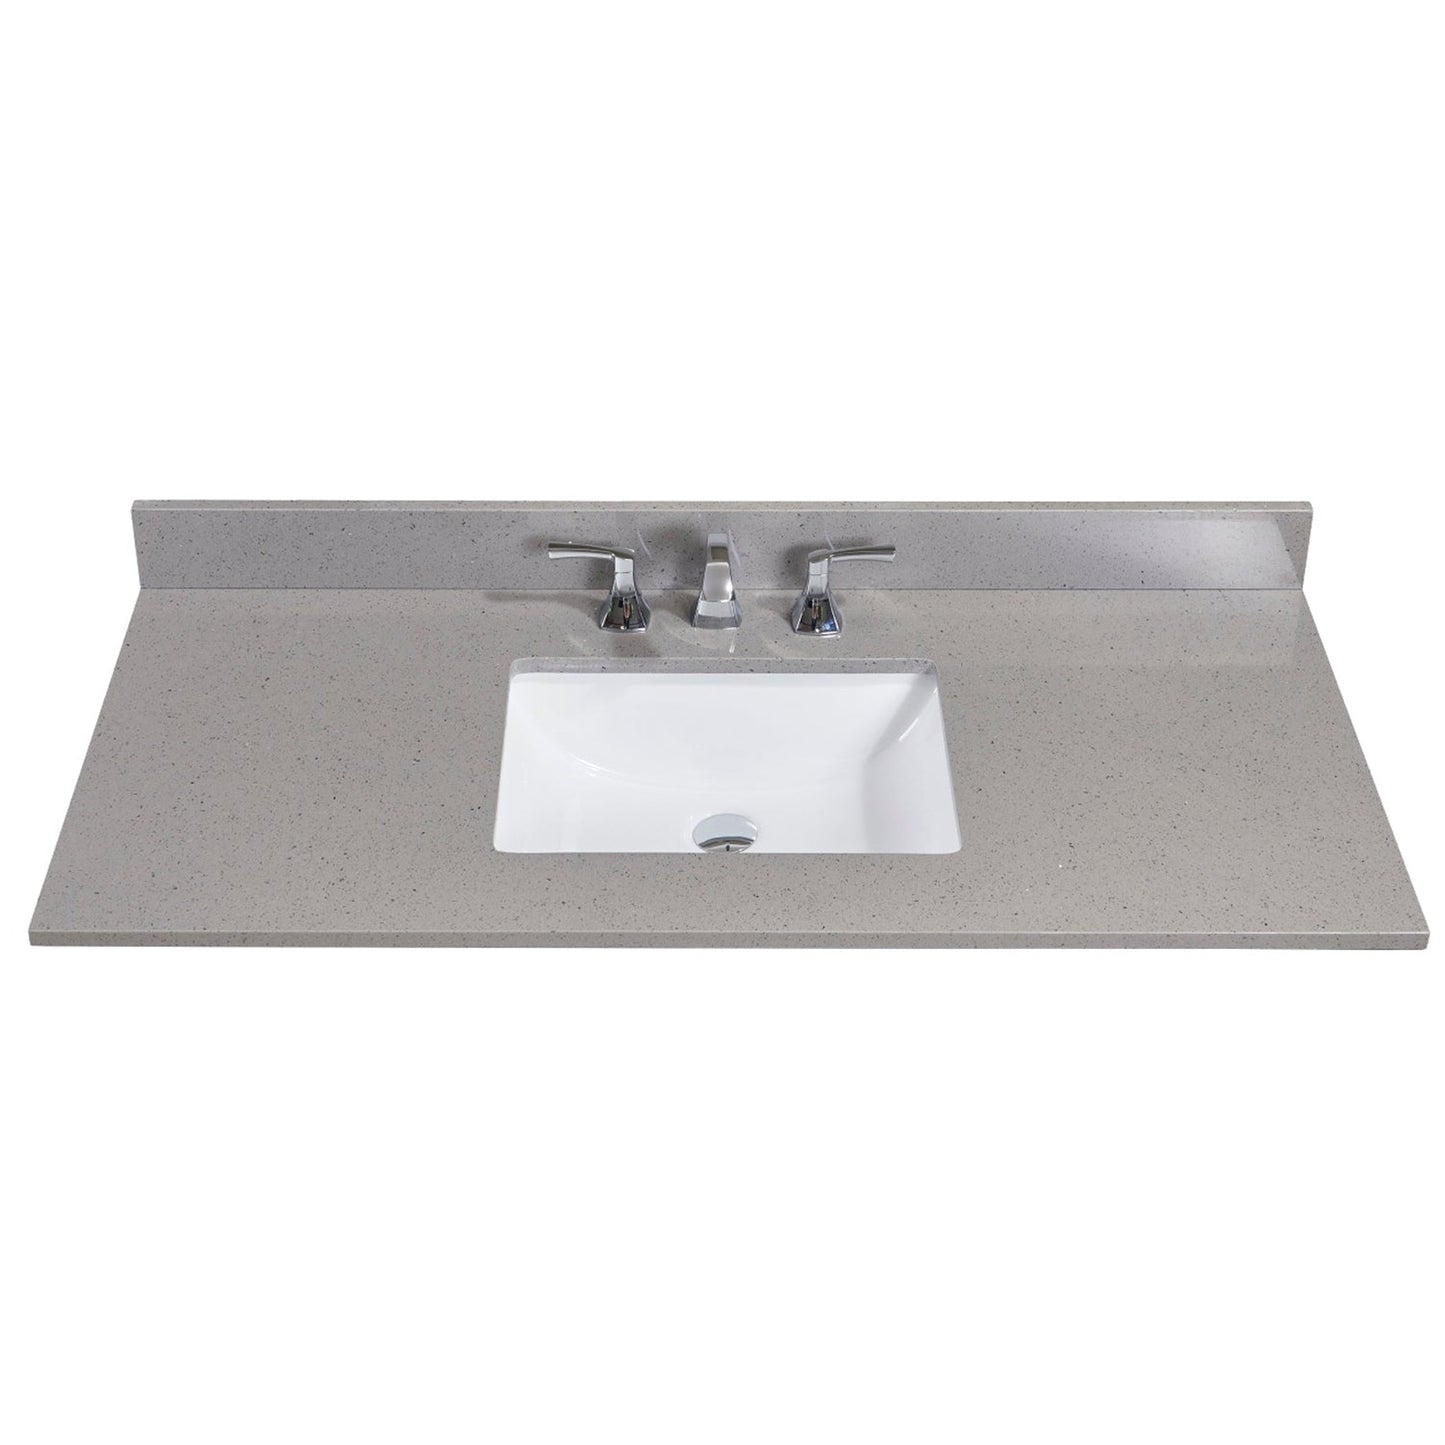 Altair Imperia 49" x 22" Mountain Gray Composite Stone Bathroom Vanity Top With White SInk